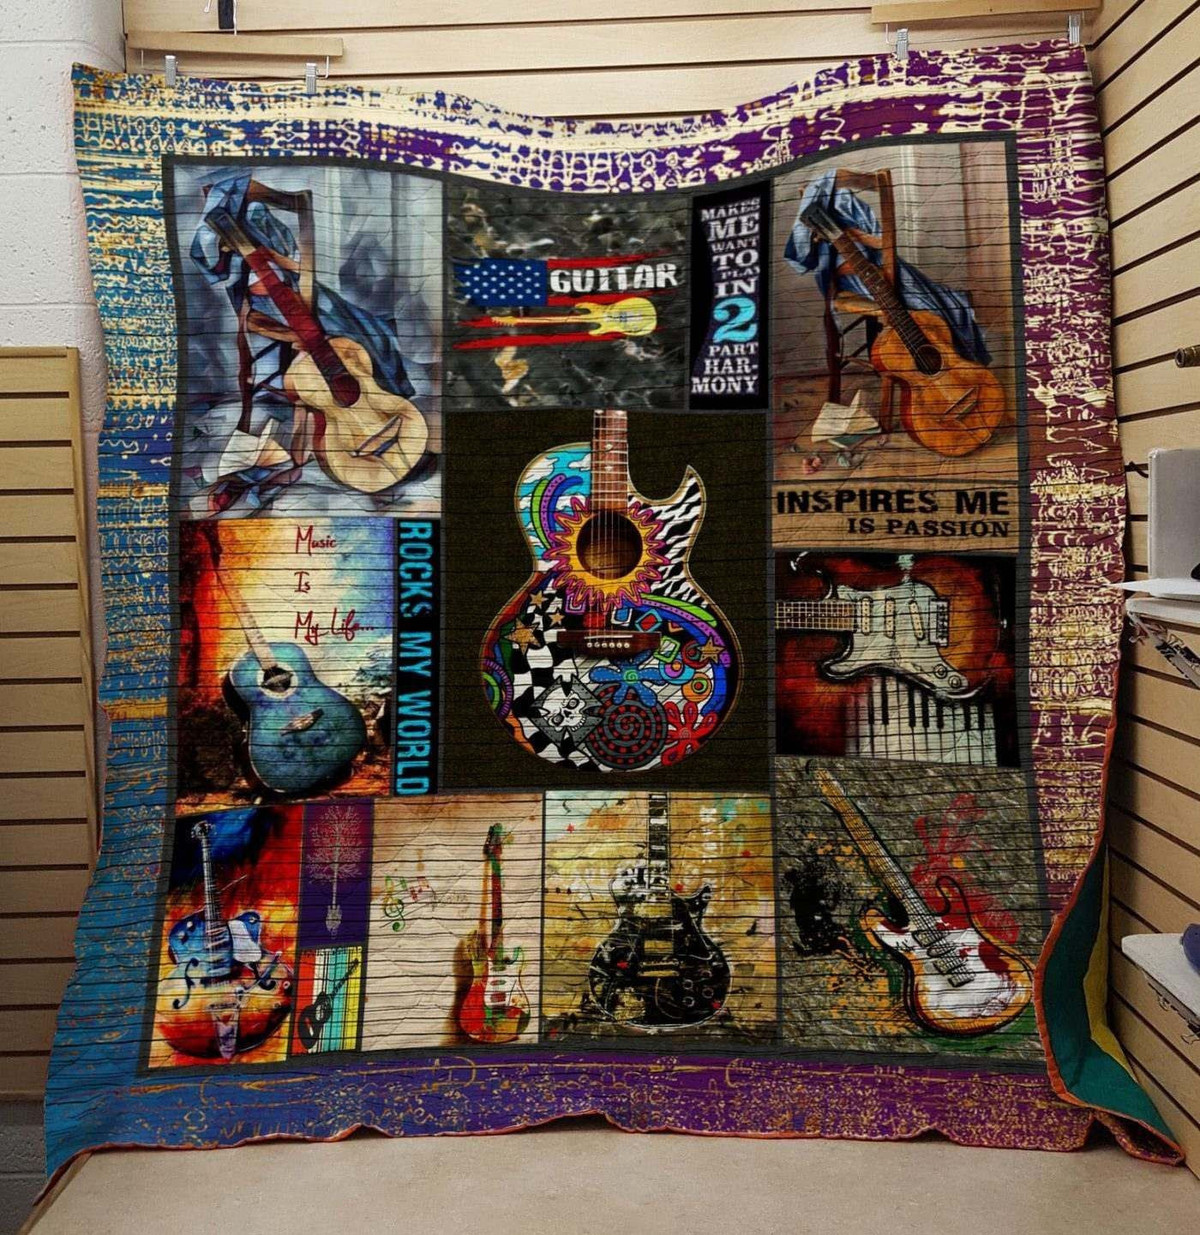 guitar-feeling-chilly-ttgg149-awesome-quilt